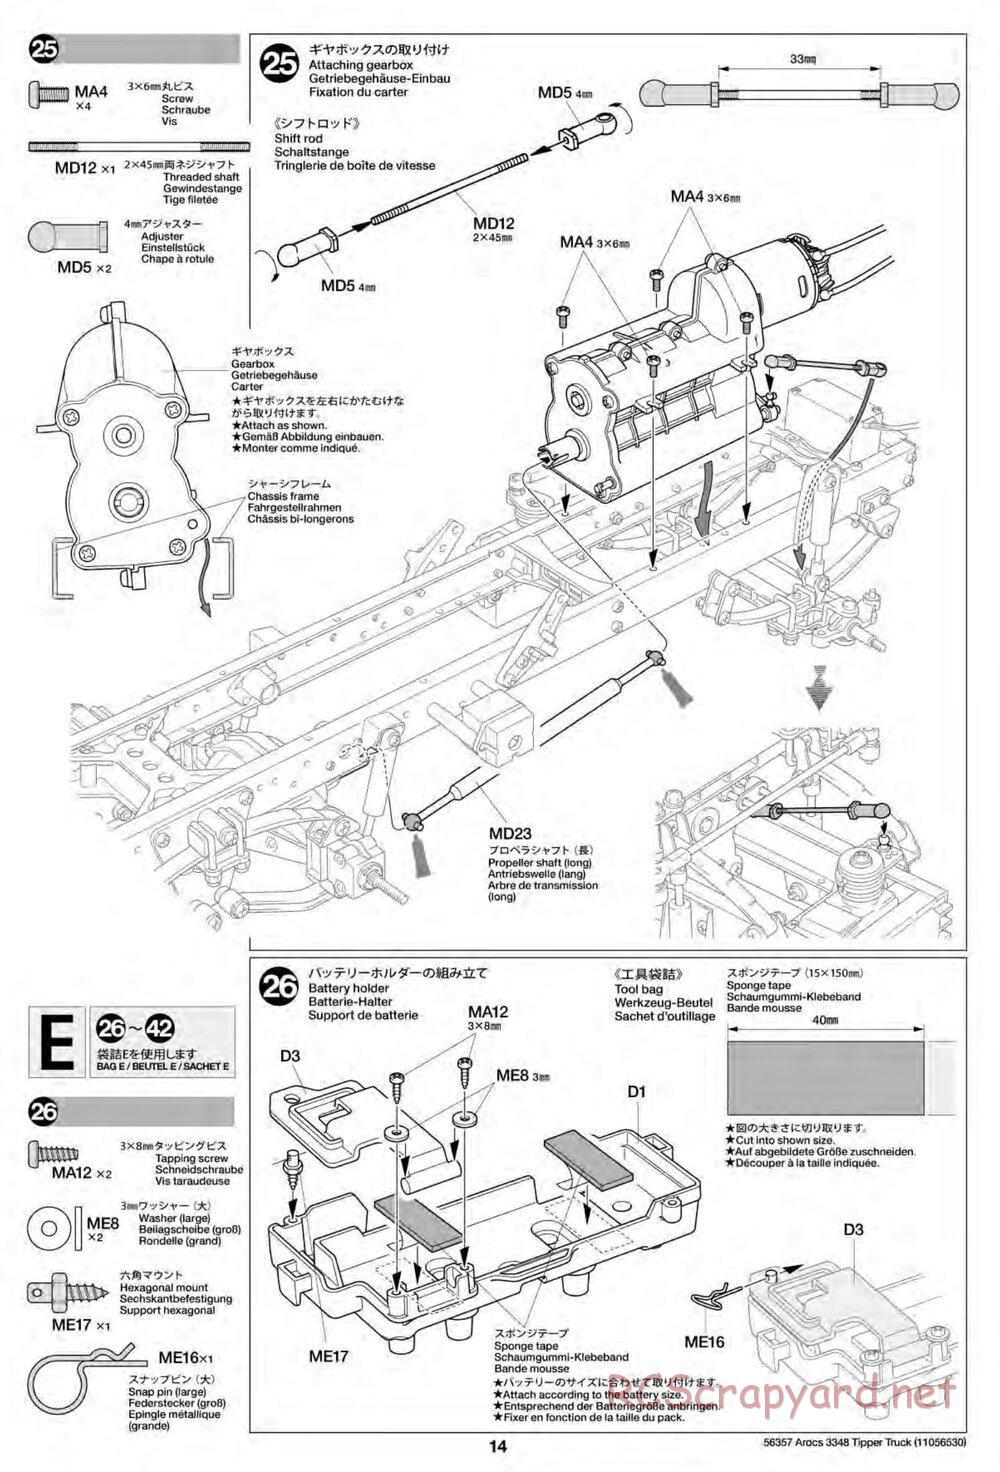 Tamiya - Mercedes-Benz Arocs 3348 6x4 Tipper Truck Chassis - Manual - Page 14